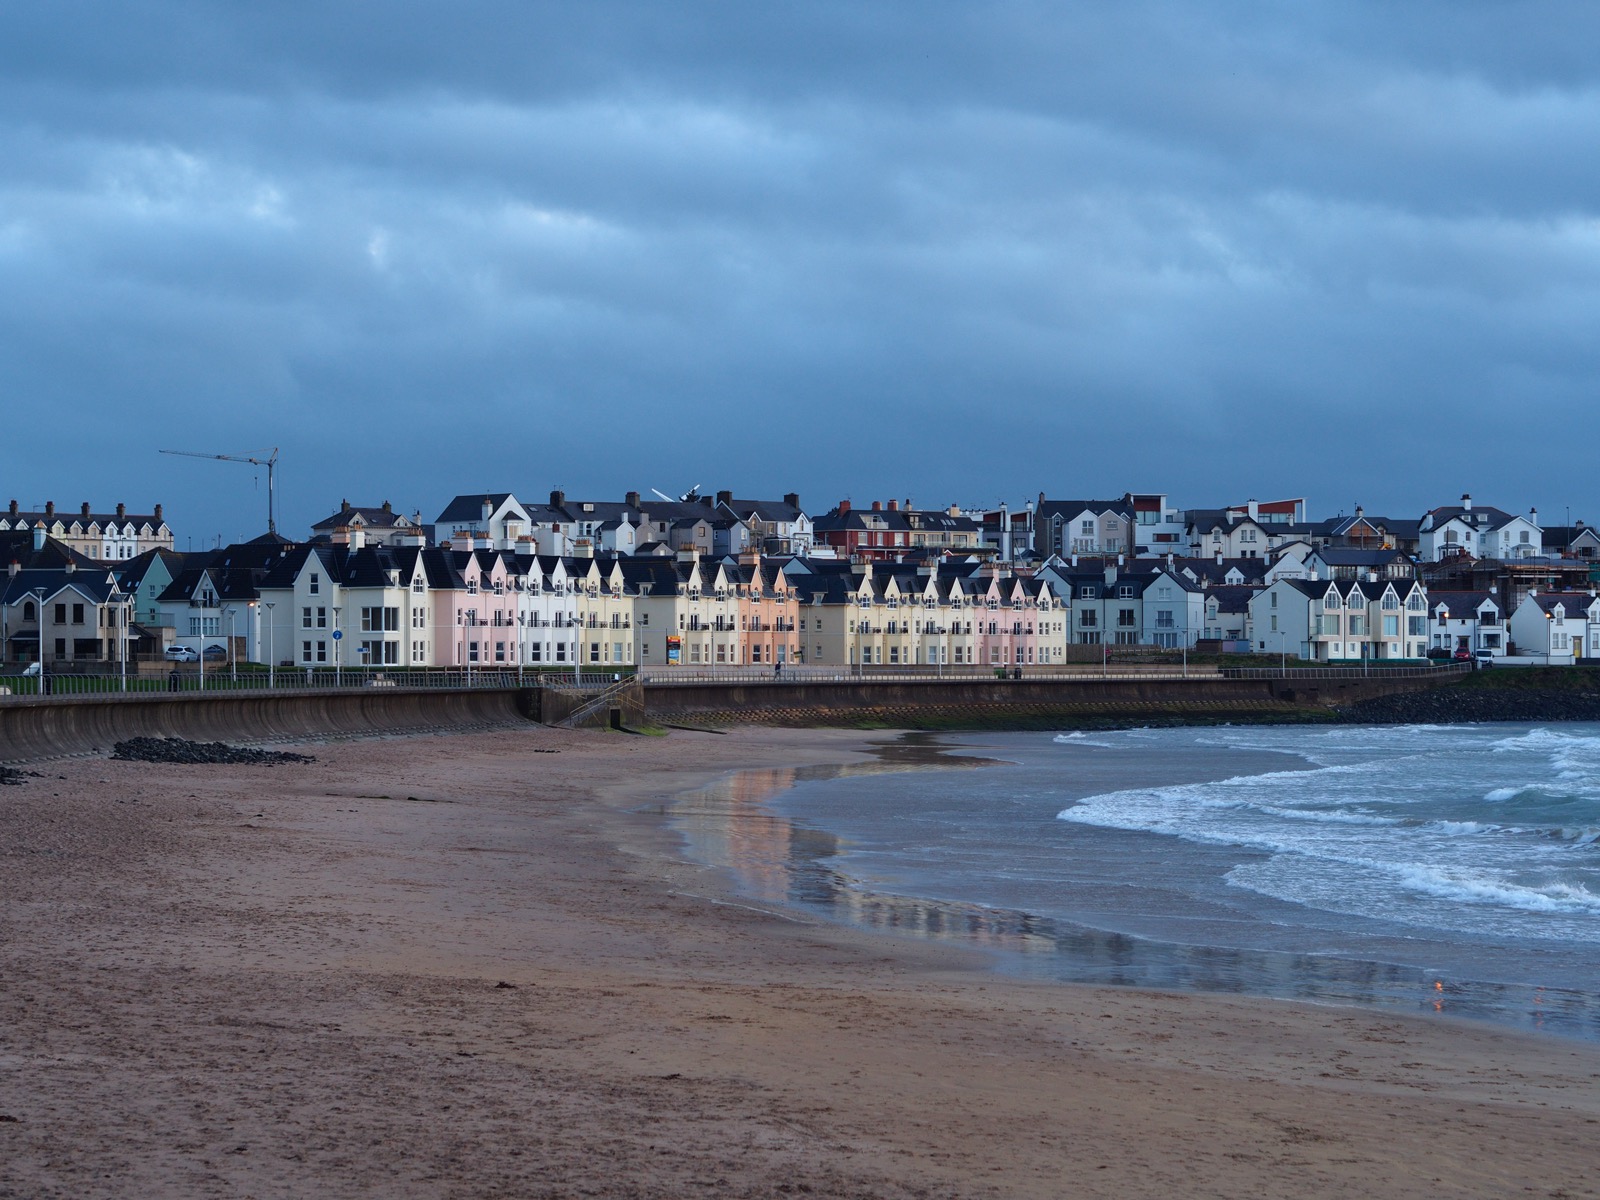 Shot of some rowhouses along the sea shore in Northern Ireland in low-angle light beneath a gray sky.